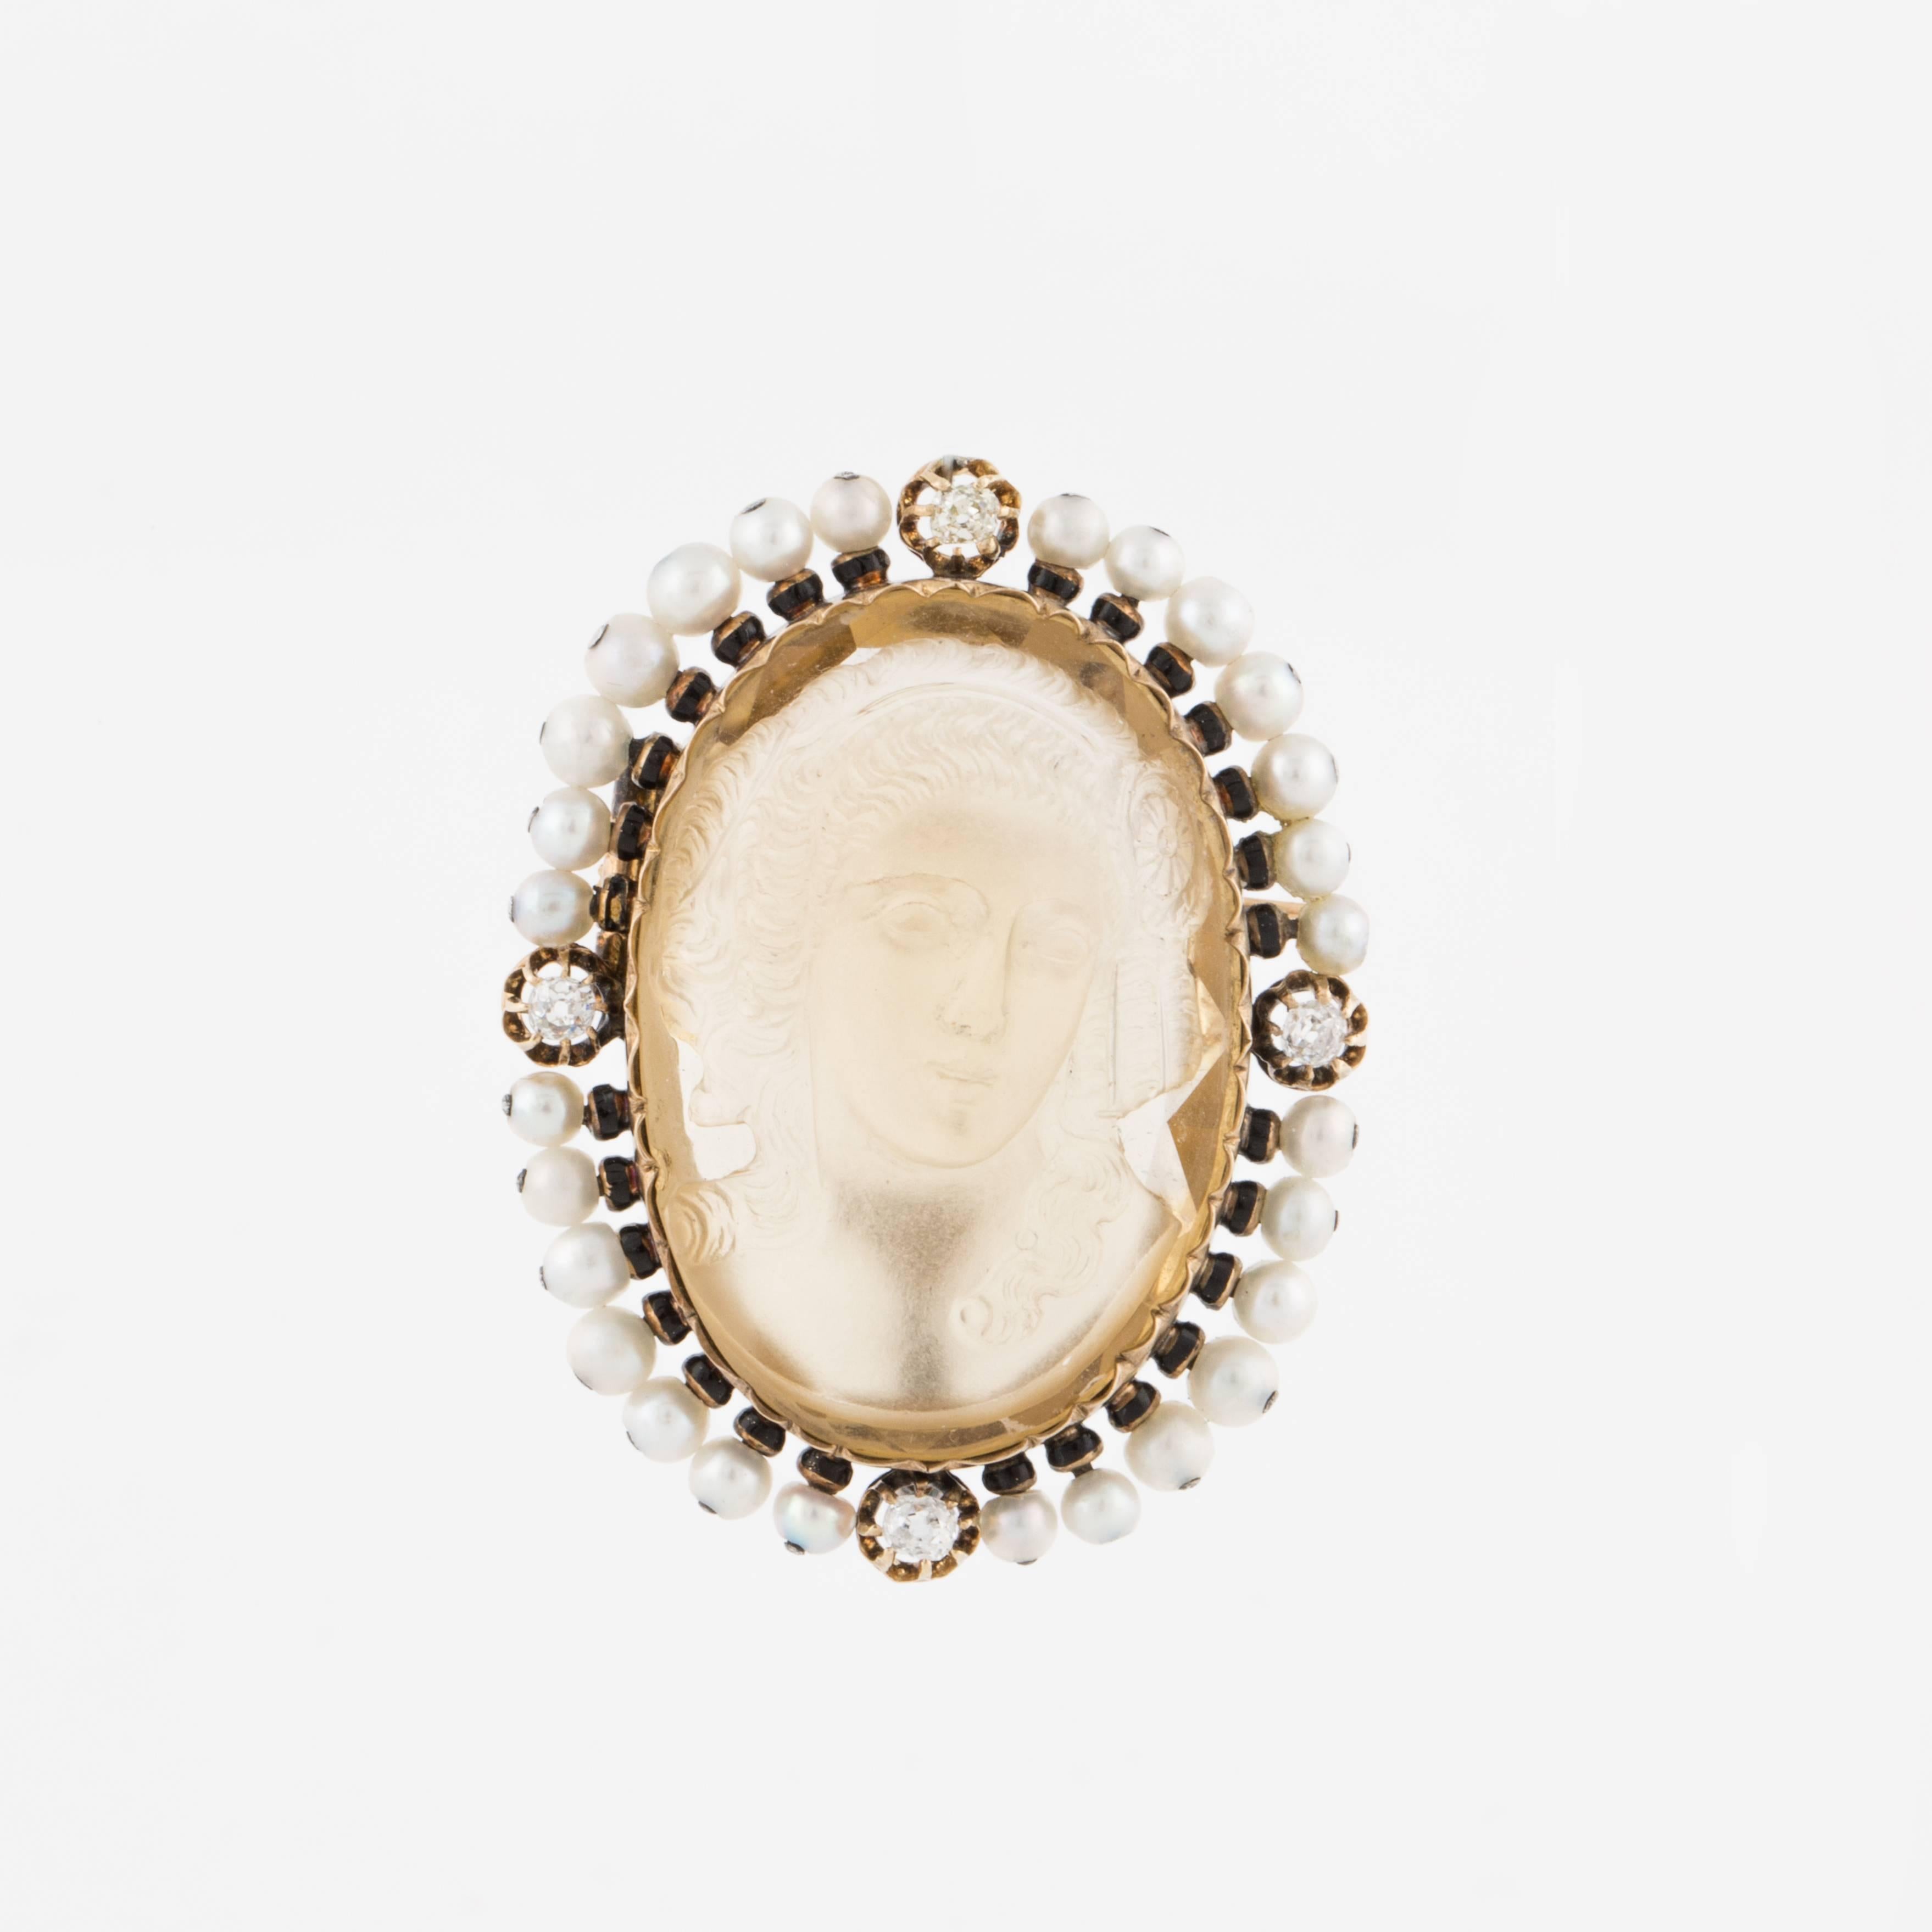 Cameo brooch composed of an 18K rose gold frame with seed pearl and diamond accents, featuring a carved citrine.  The diamonds total 0.50 carats.  It measures 1 5/16 inches long, 1 5/16 inches wide and 5/8 inches deep.  French origin.